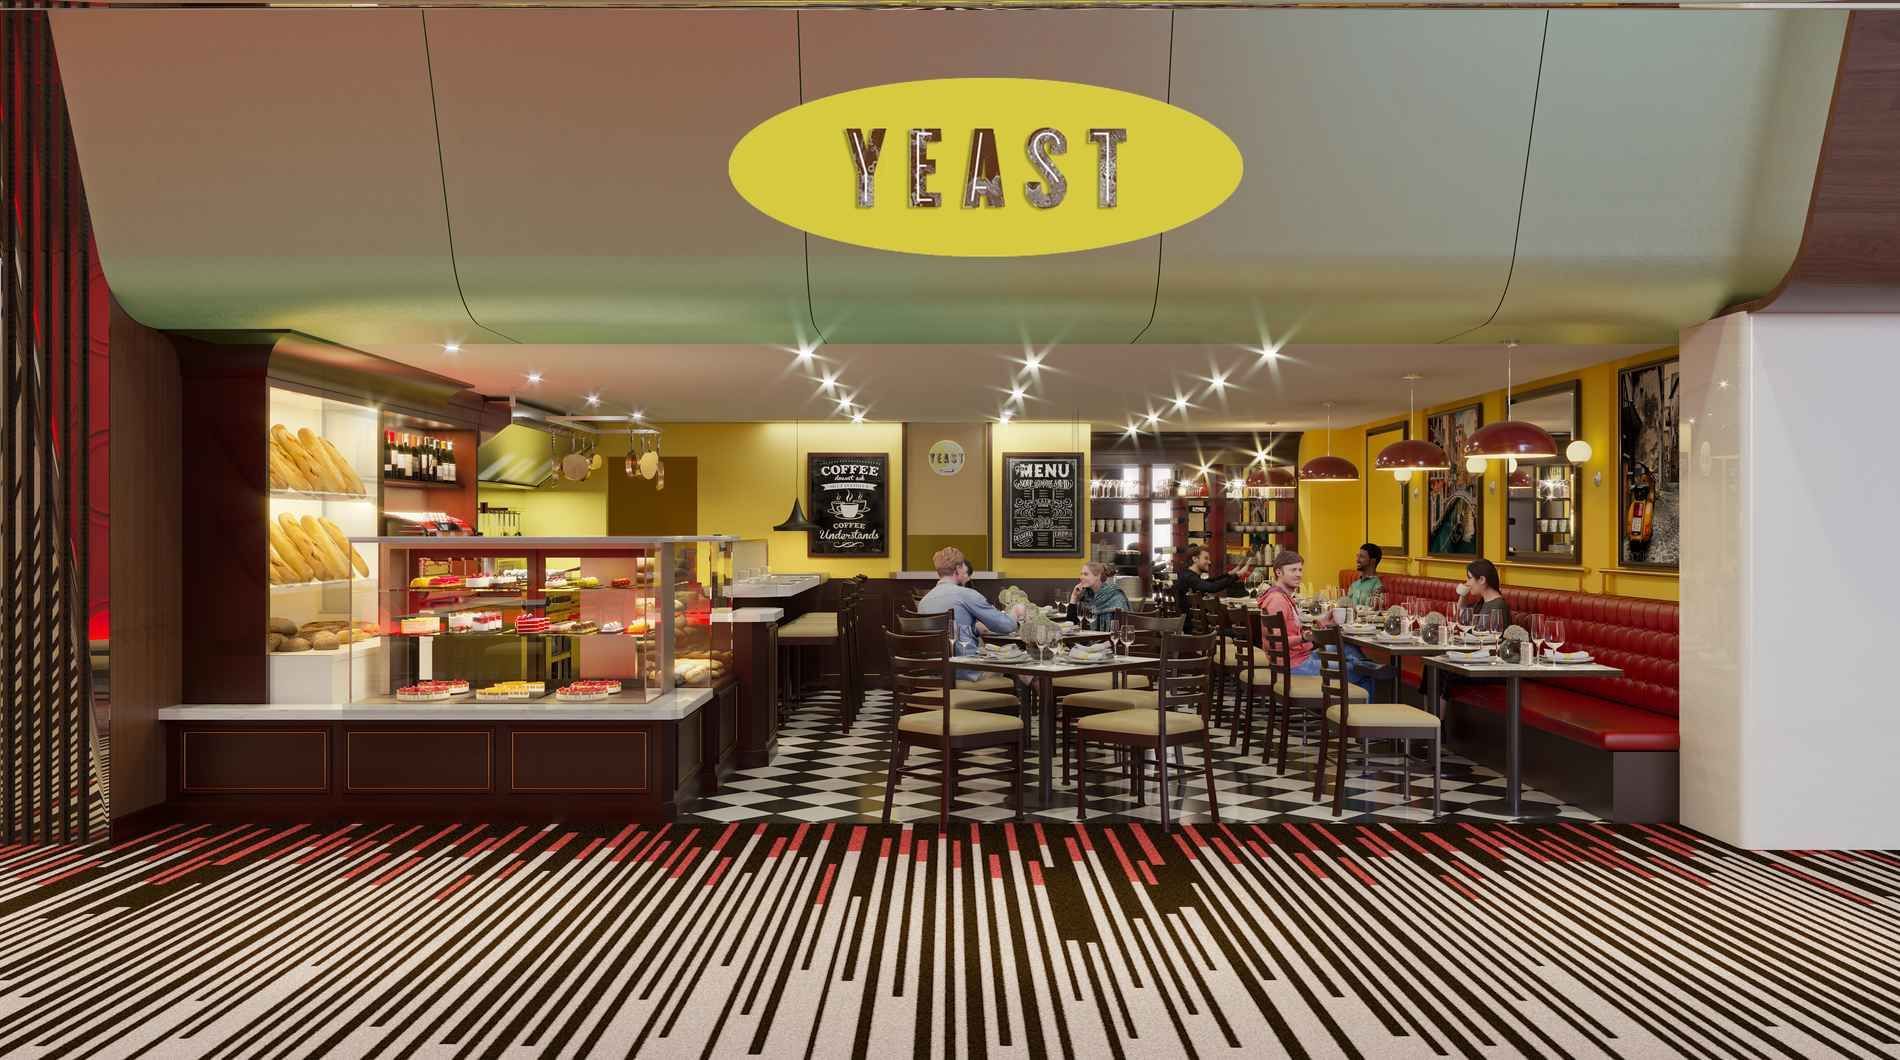 Exterior of the Yeast at Sunway Hotel Pyramid